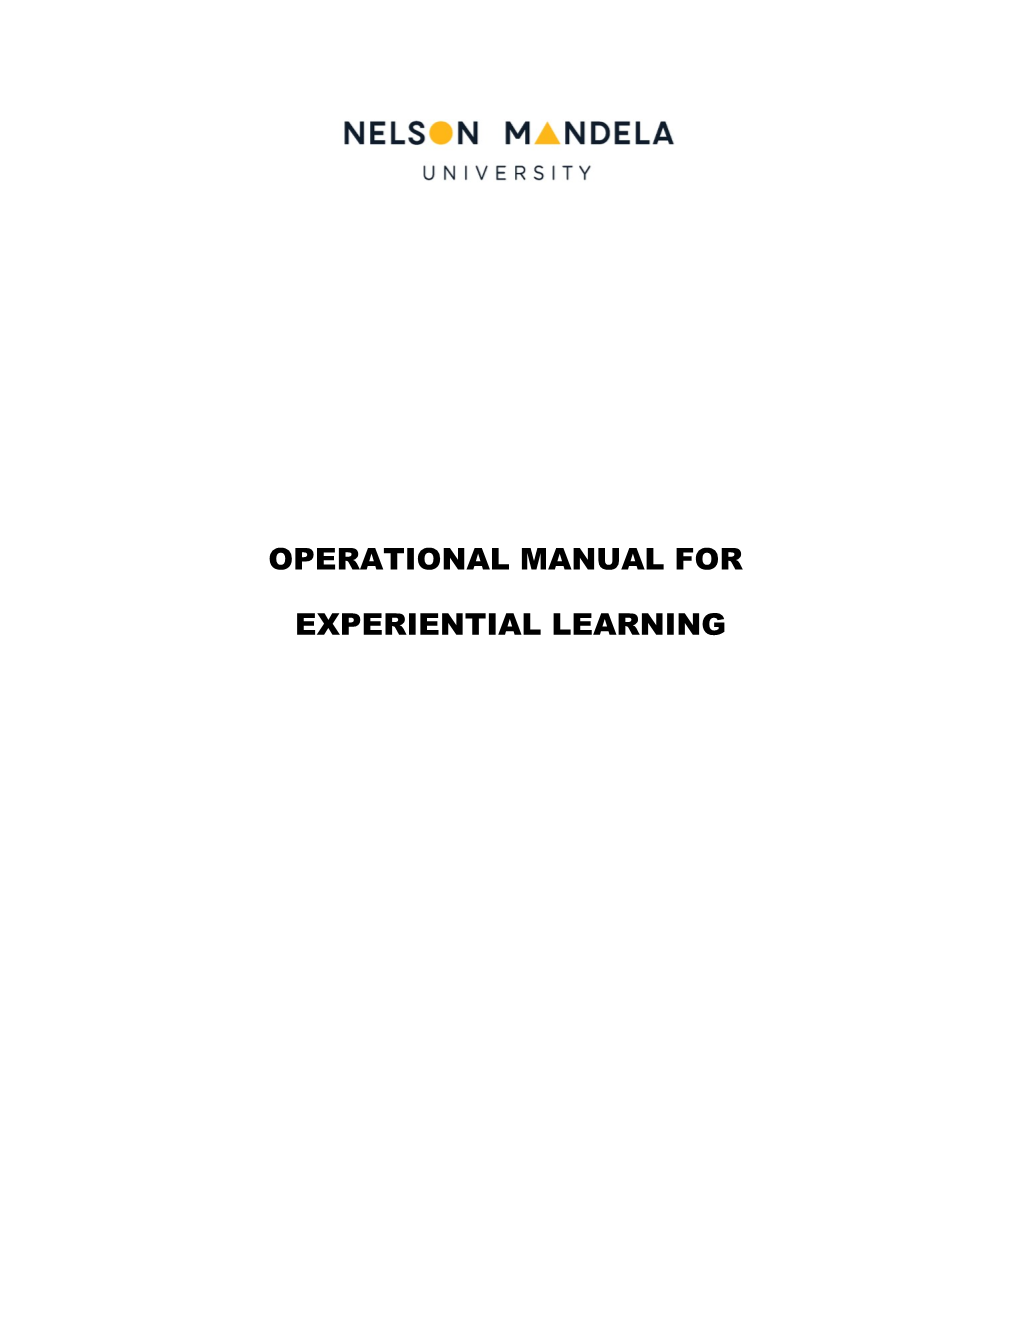 Operational Manual For